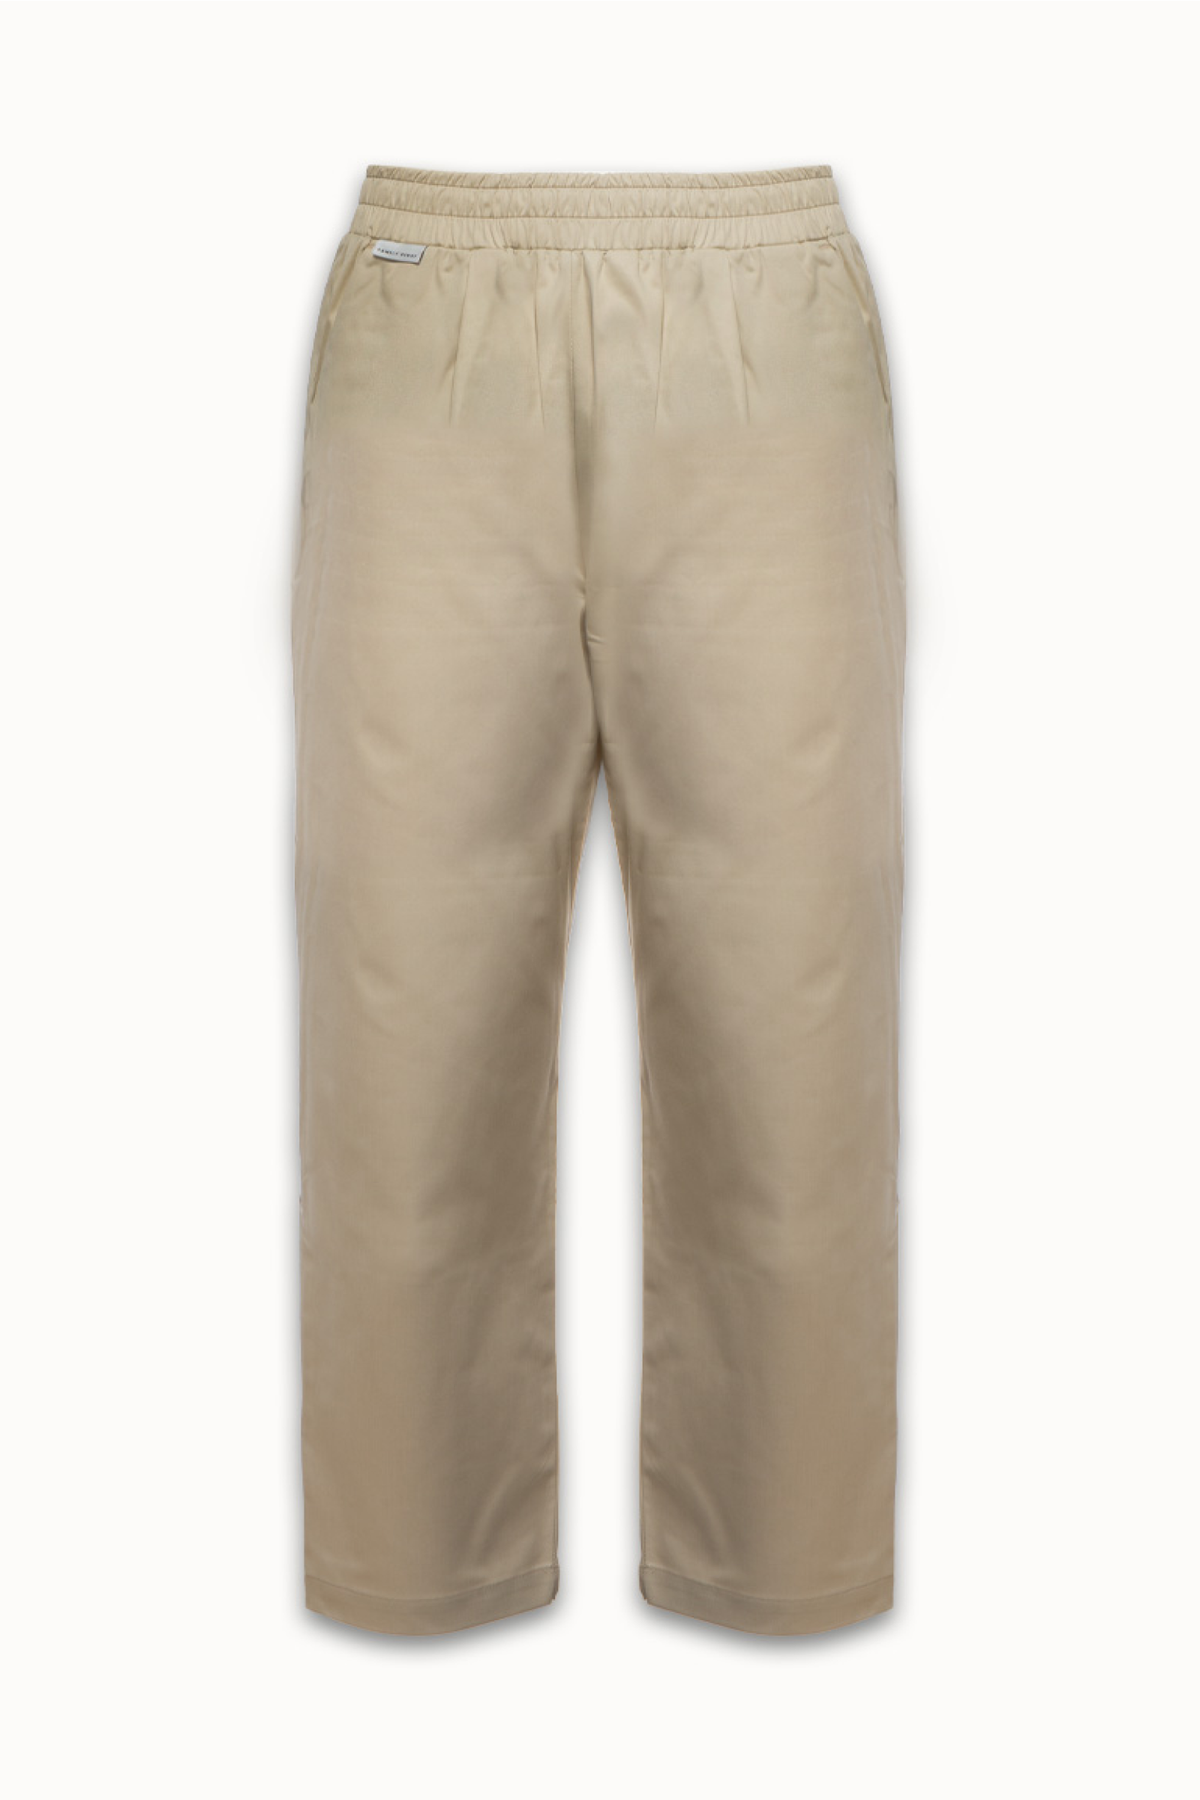 Family First Chino Pants - Beige